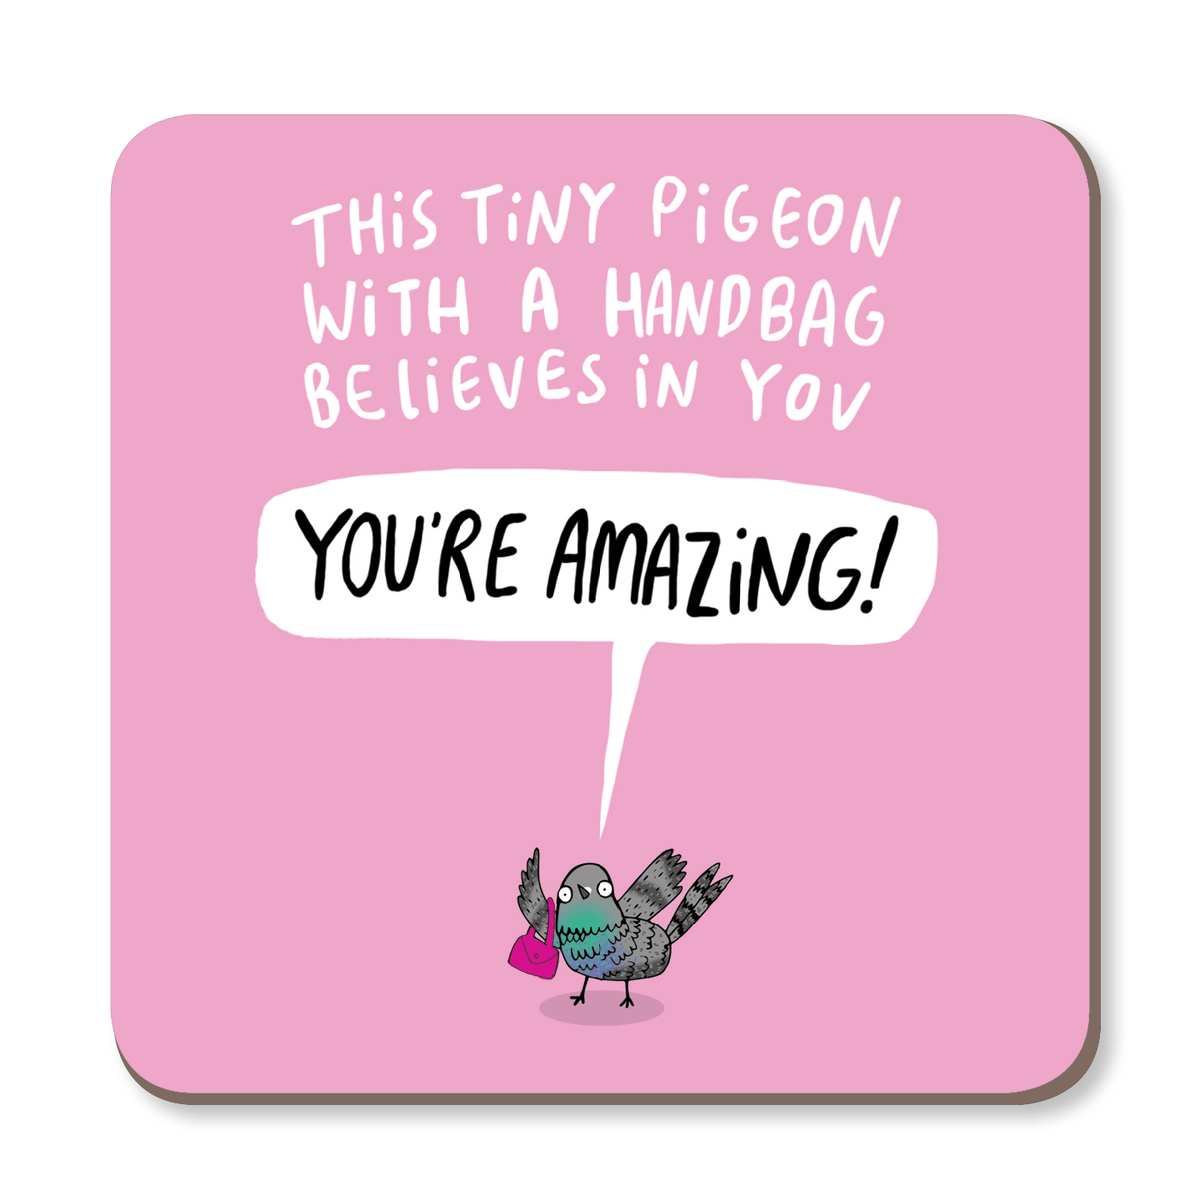 Tiny Pigeon With A Handbag Motivational Coaster by Katie Abey - Whale and Bird